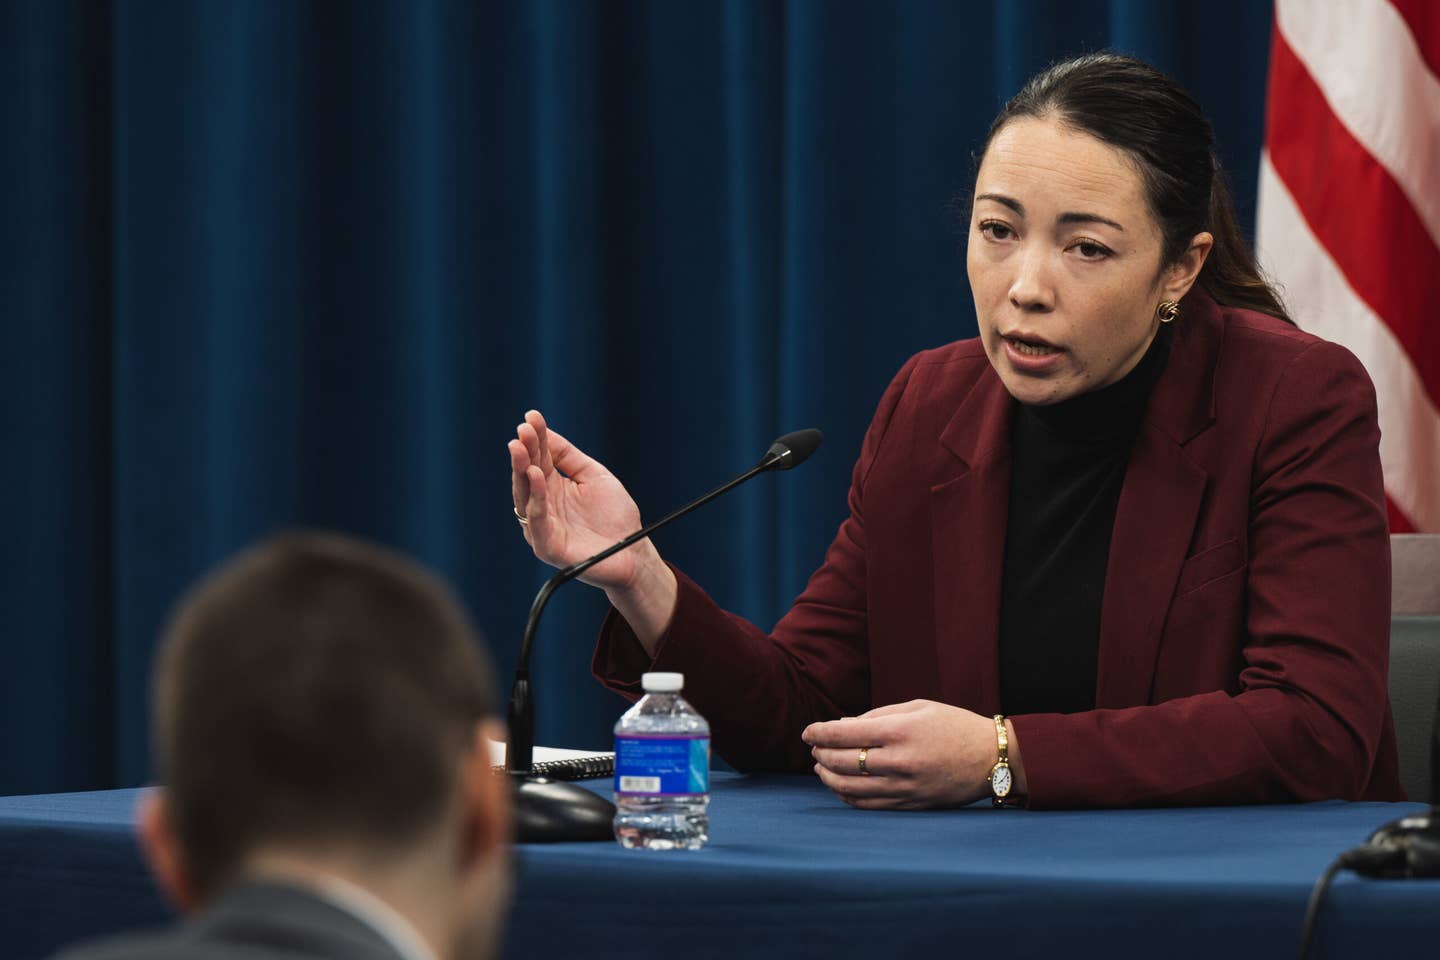 CENTCOM's first-ever CTO Schuyler Moore conducts a press briefing on artificial intelligence and unmanned systems at the Pentagon, Washington, D.C., Dec. 7, 2022. <em>Credit: Photo by U.S. Navy Petty Officer 2nd Class Alexander Kubitza</em>